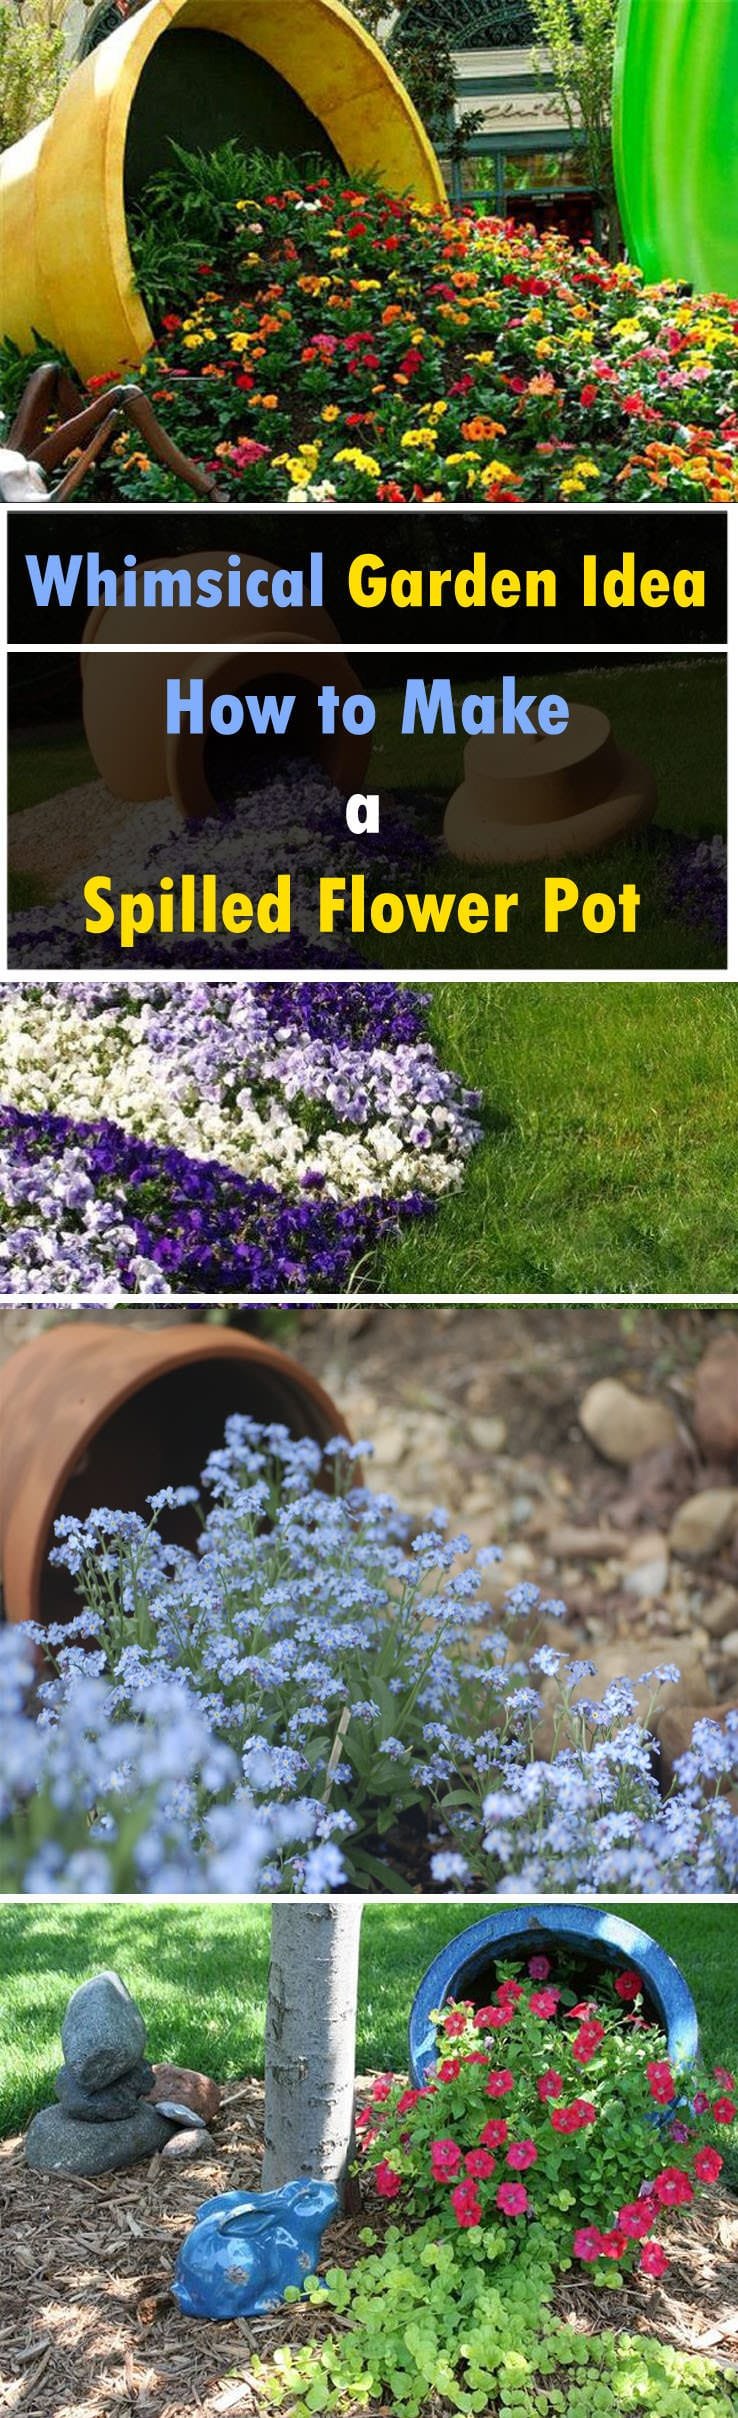 Add a whim to your garden. Make a spilled flower pot. It will also work as a focal point of your garden.